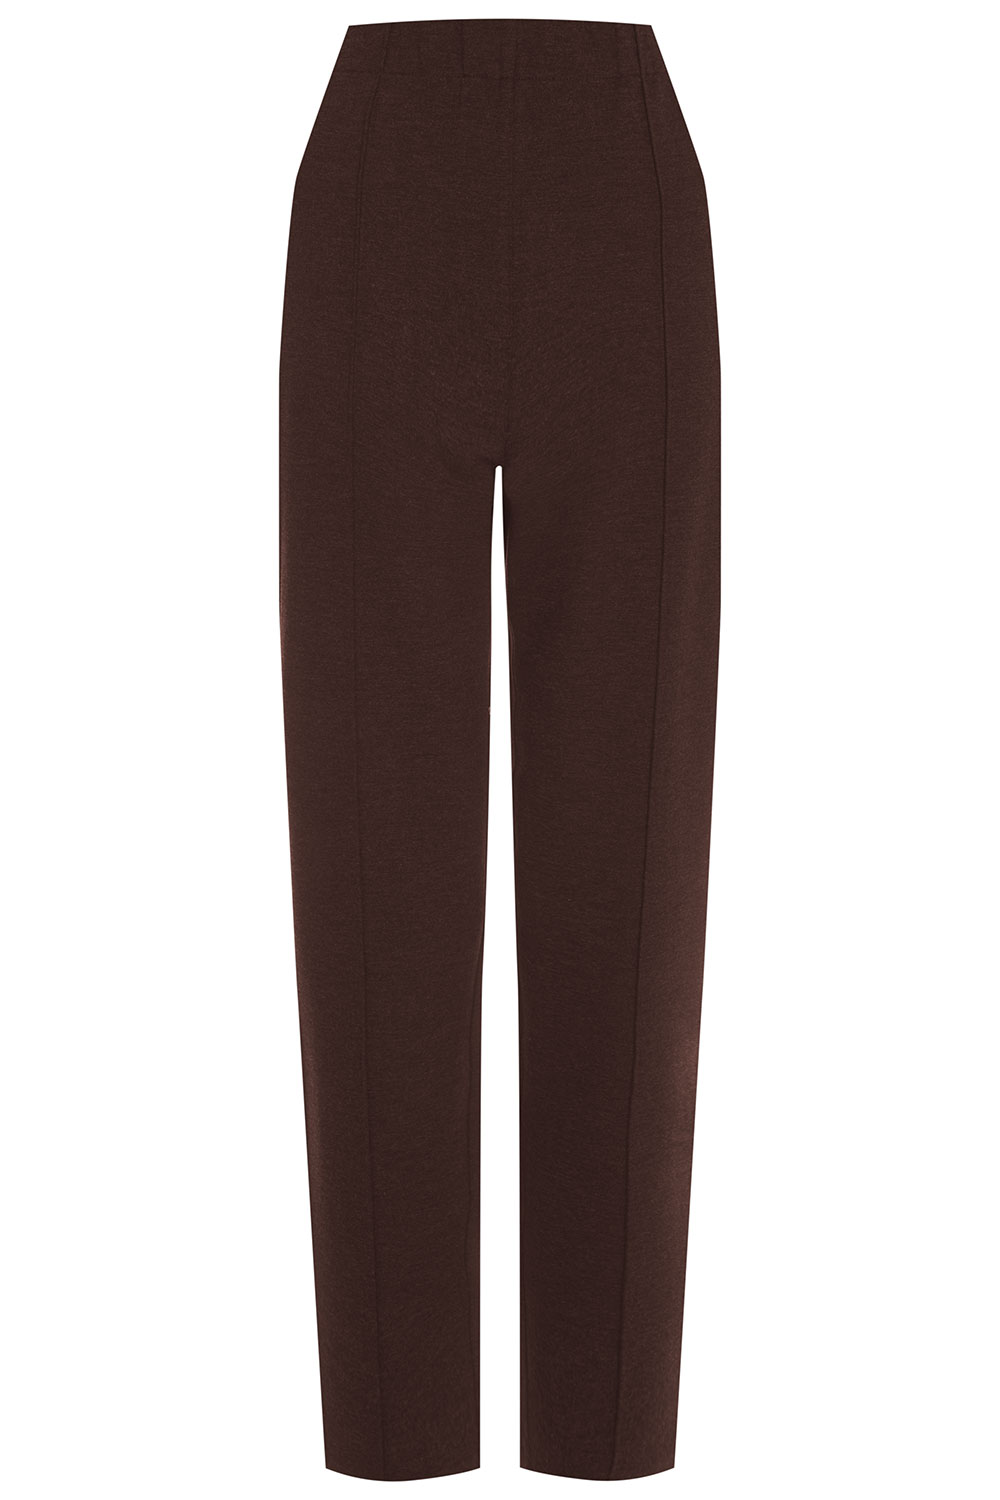 Pleat Front Jersey Marl Tapered Leg Elasticated Trousers | Bonmarché